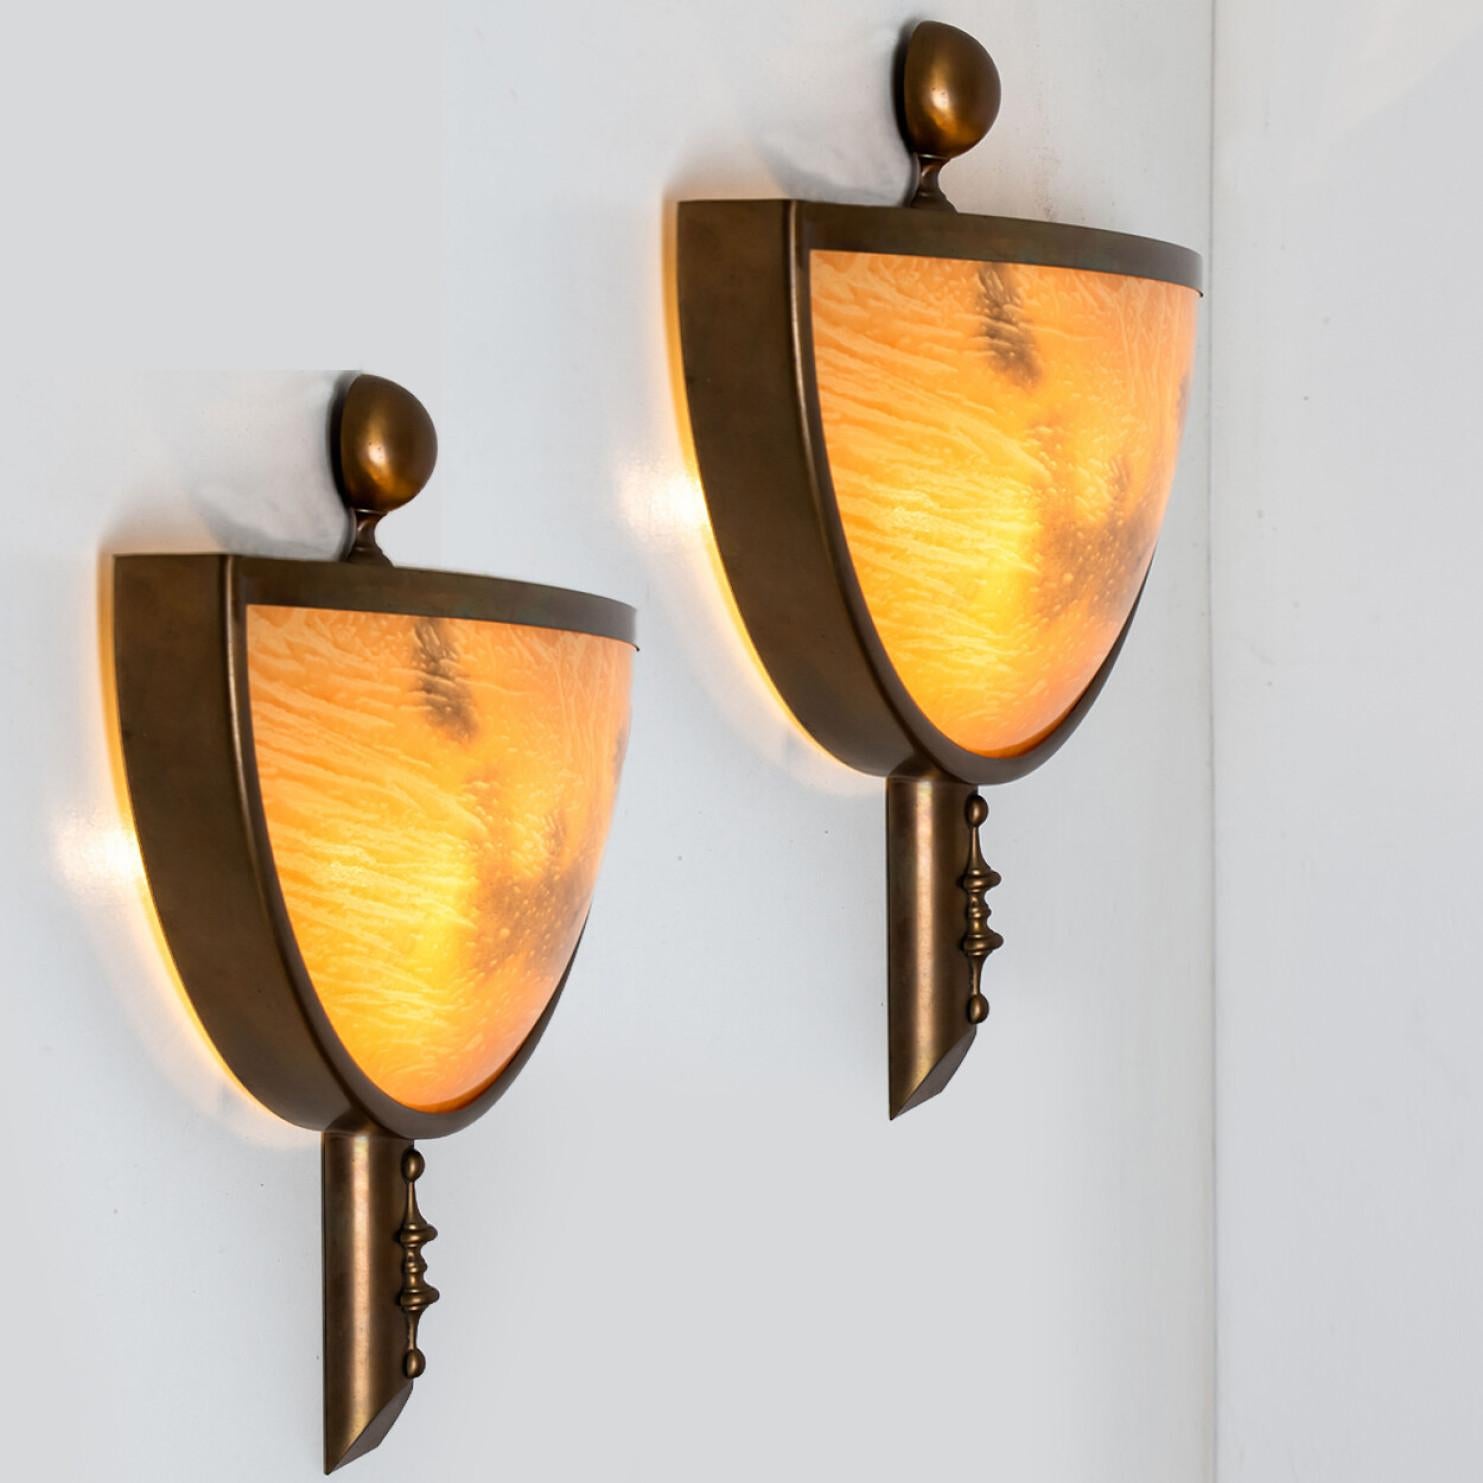 Art deco style brass and marbled glass wall lights. Light orange and grey, dark brassed material. Manufactured in Italy around 1970.
With their clean modernist lines and beautiful attention to detail, these sconces would be a winning addition to any